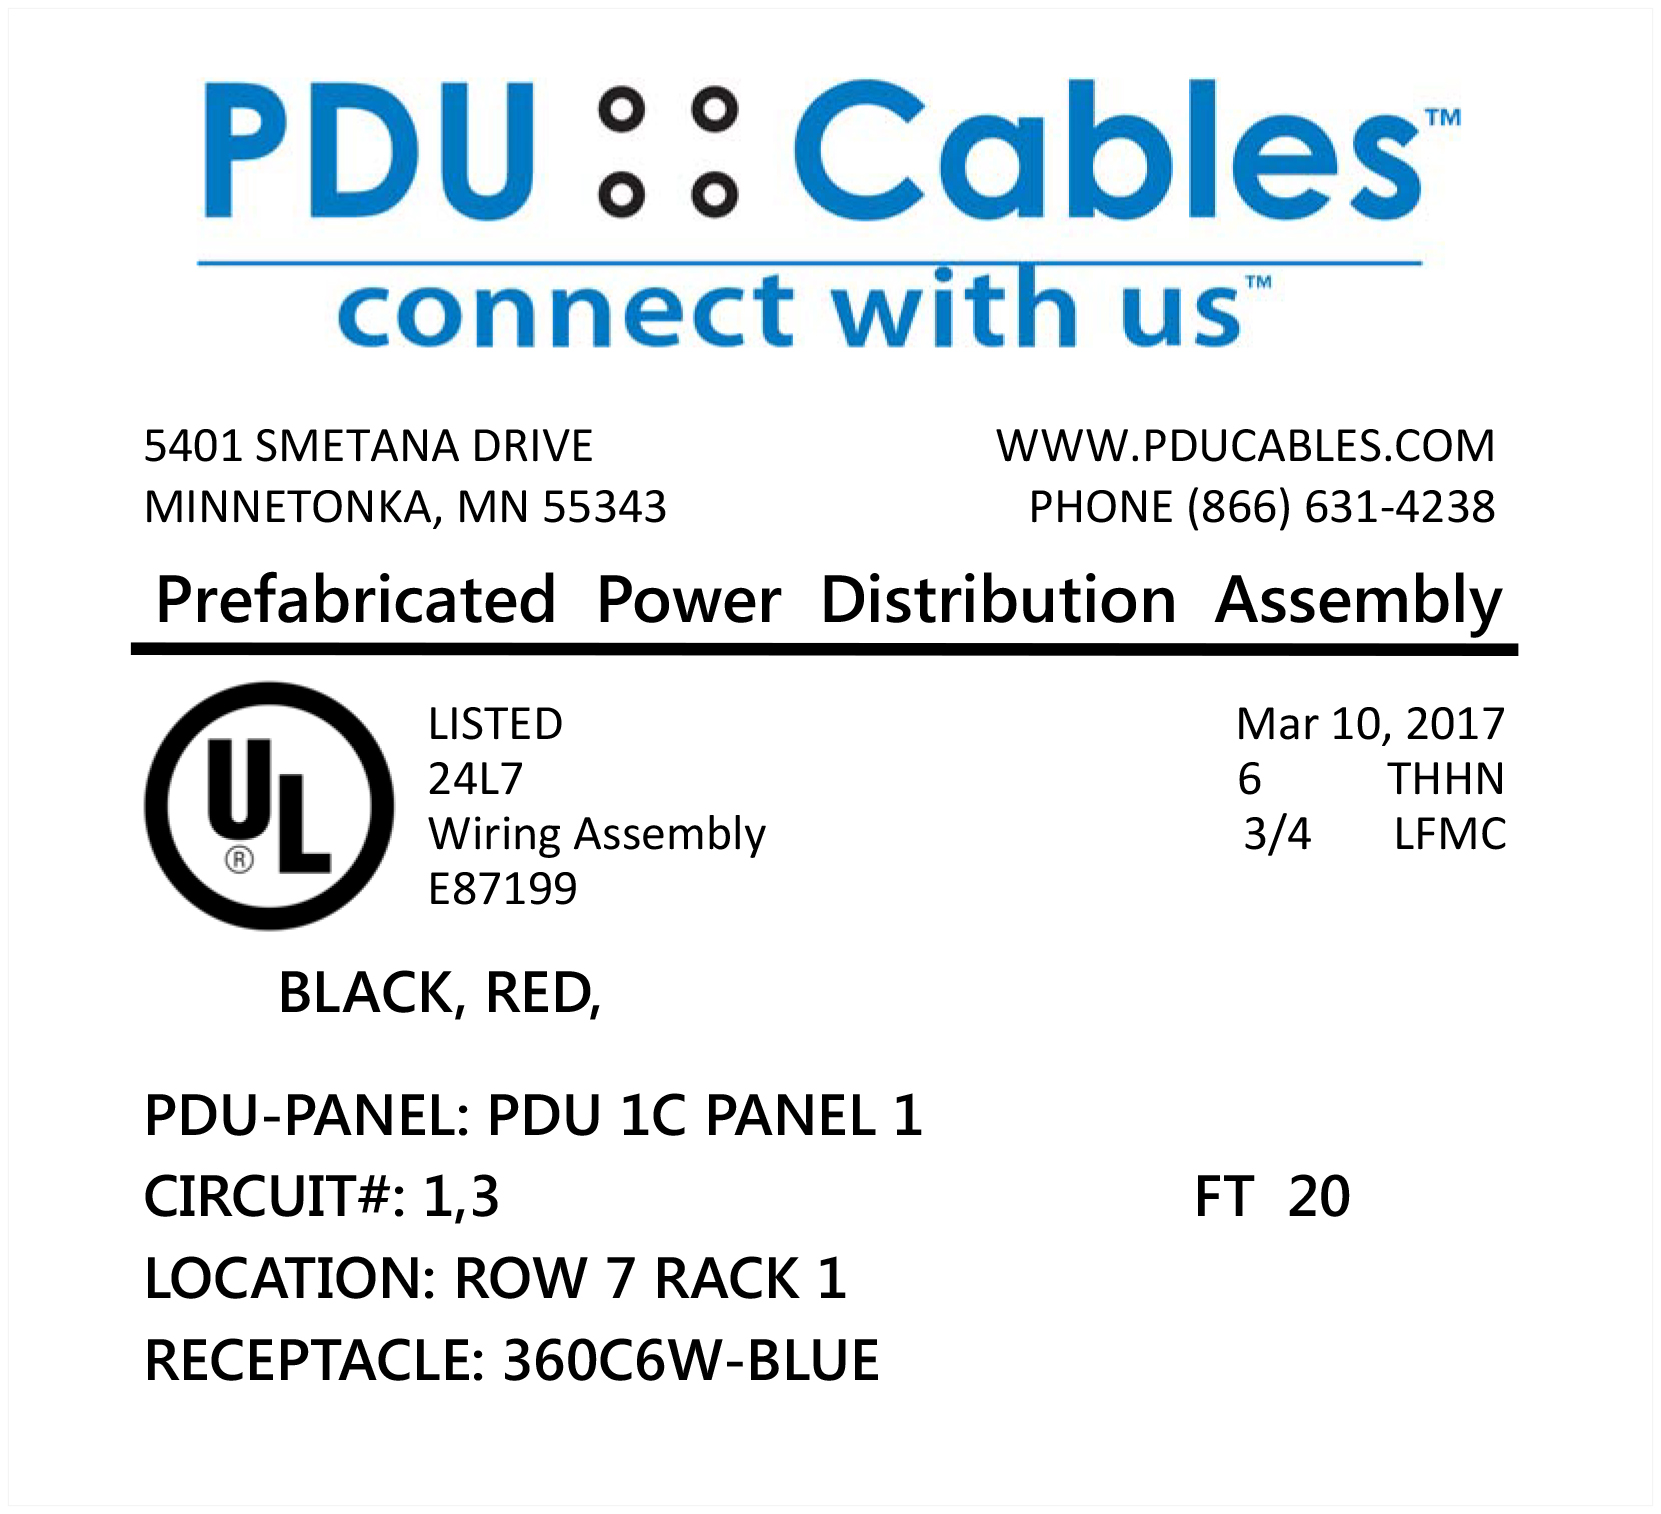 Each PDU Cable power whip includes a cable identification label which references the circuit number, equipment, PDU panel, receptacle and length, as well as the UL certification.  